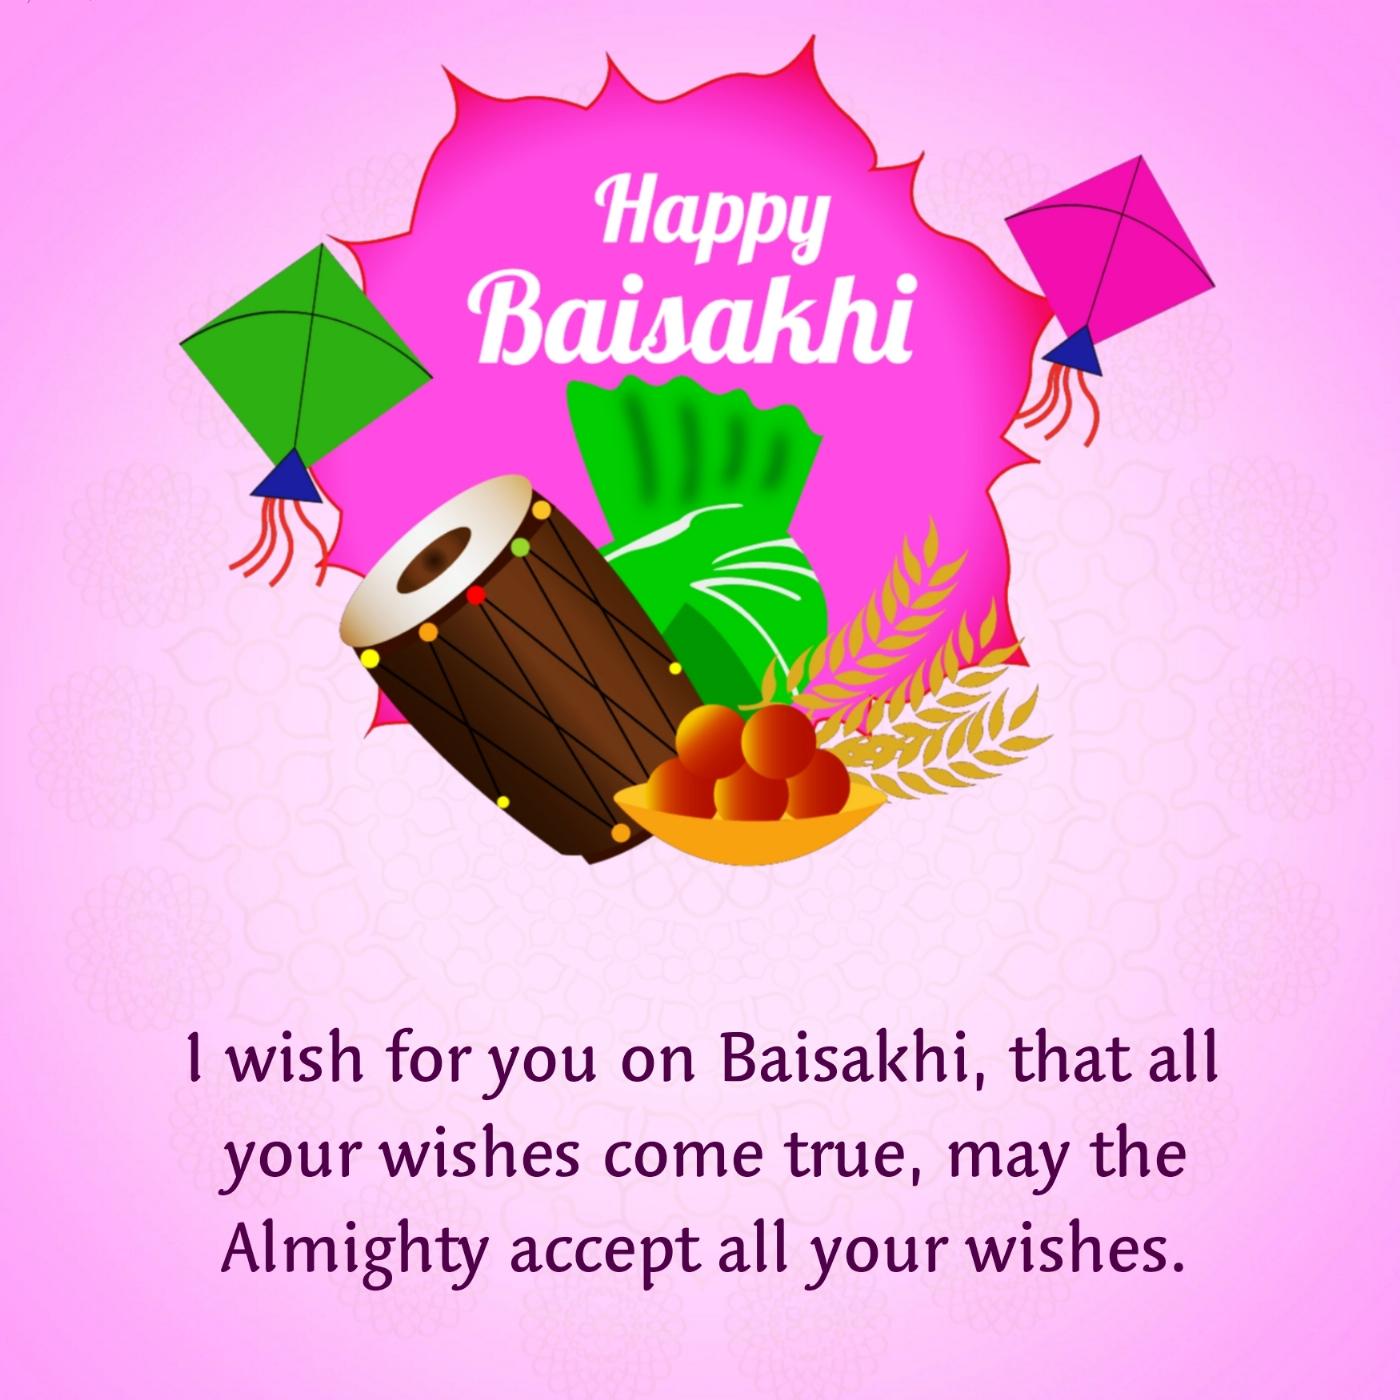 I wish for you on Baisakhi that all your wishes come true